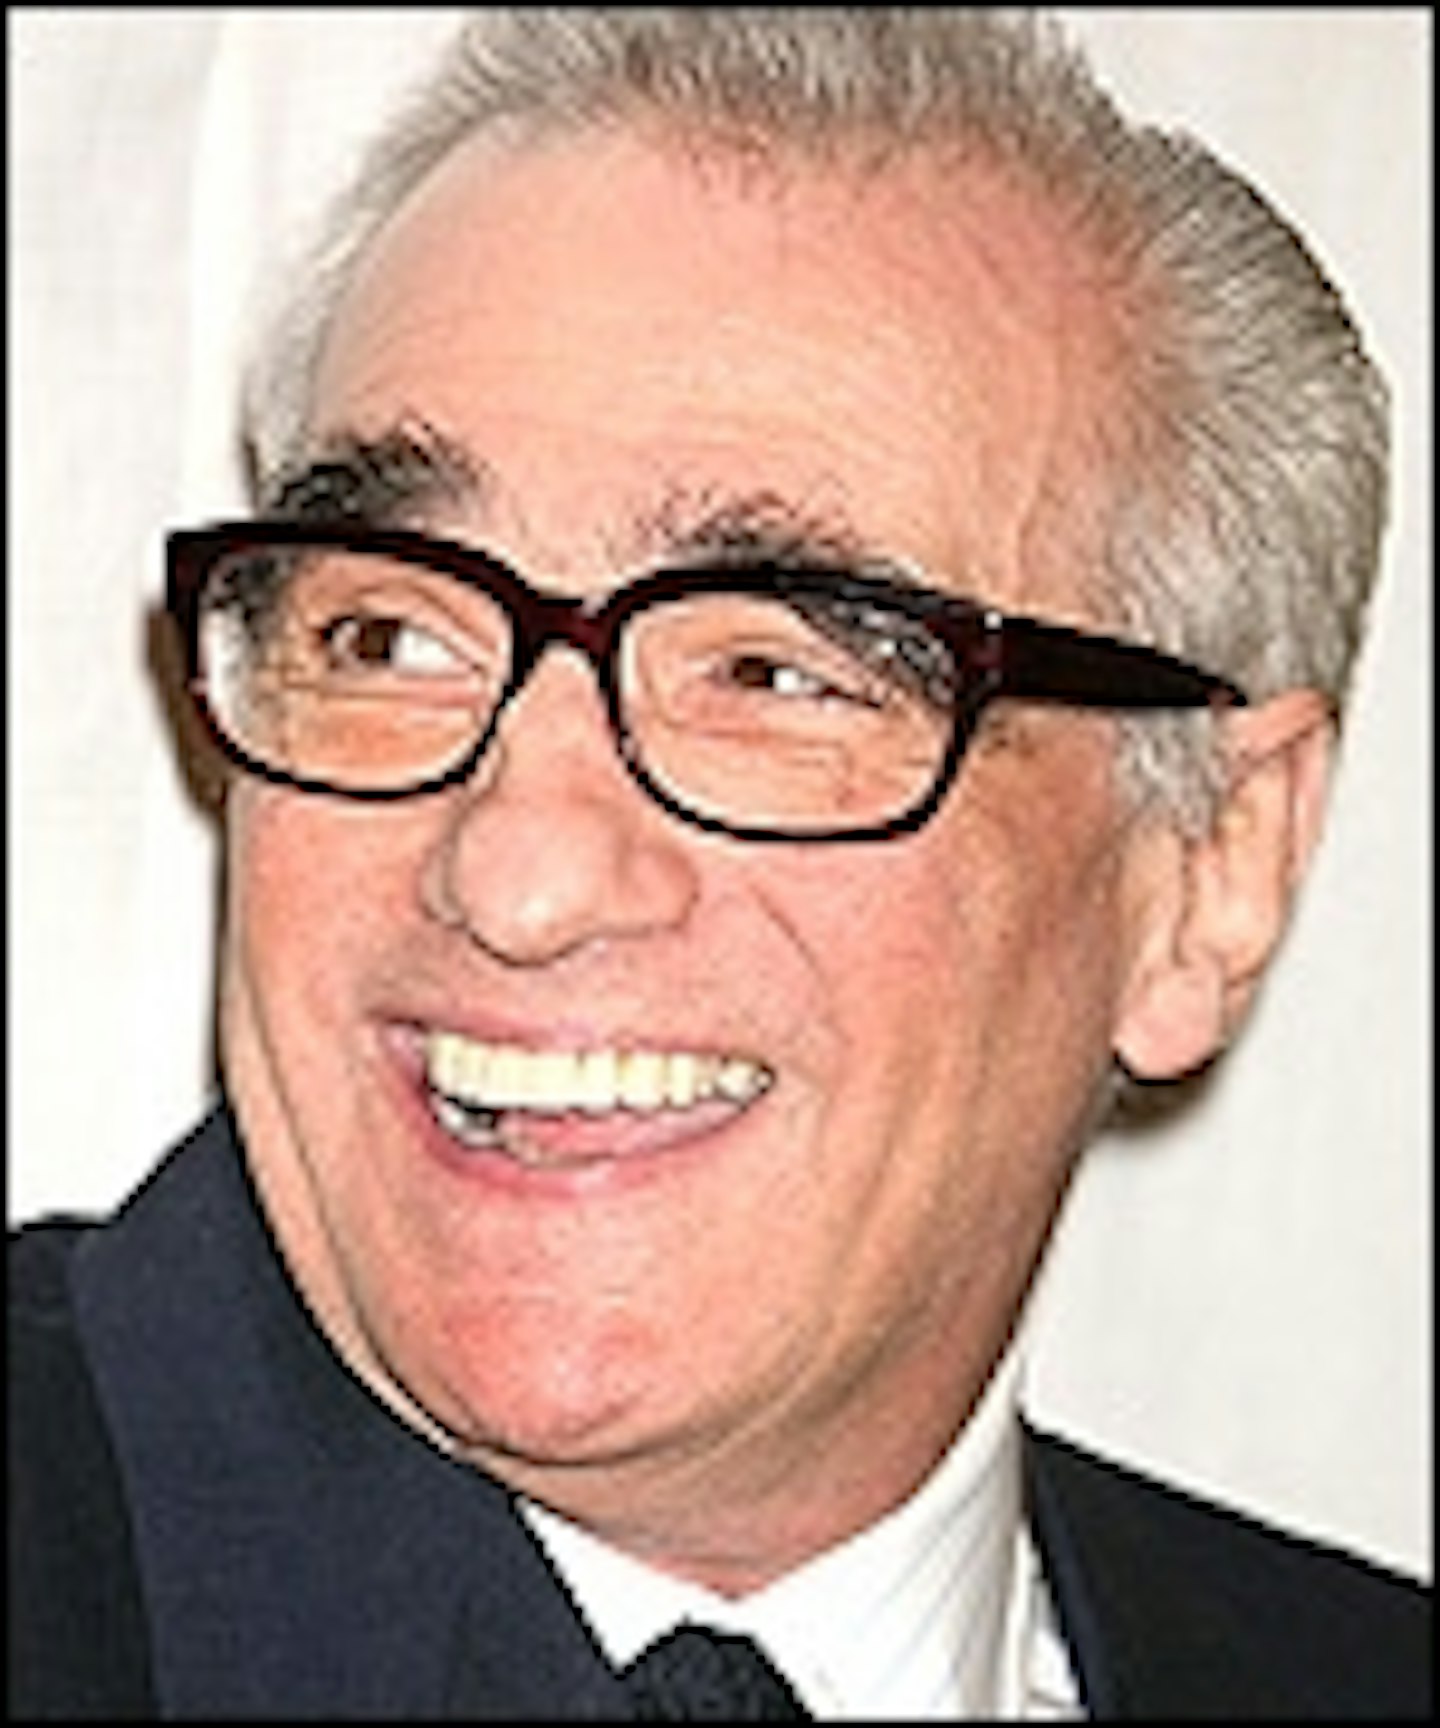 Scorsese To Receive Another Award